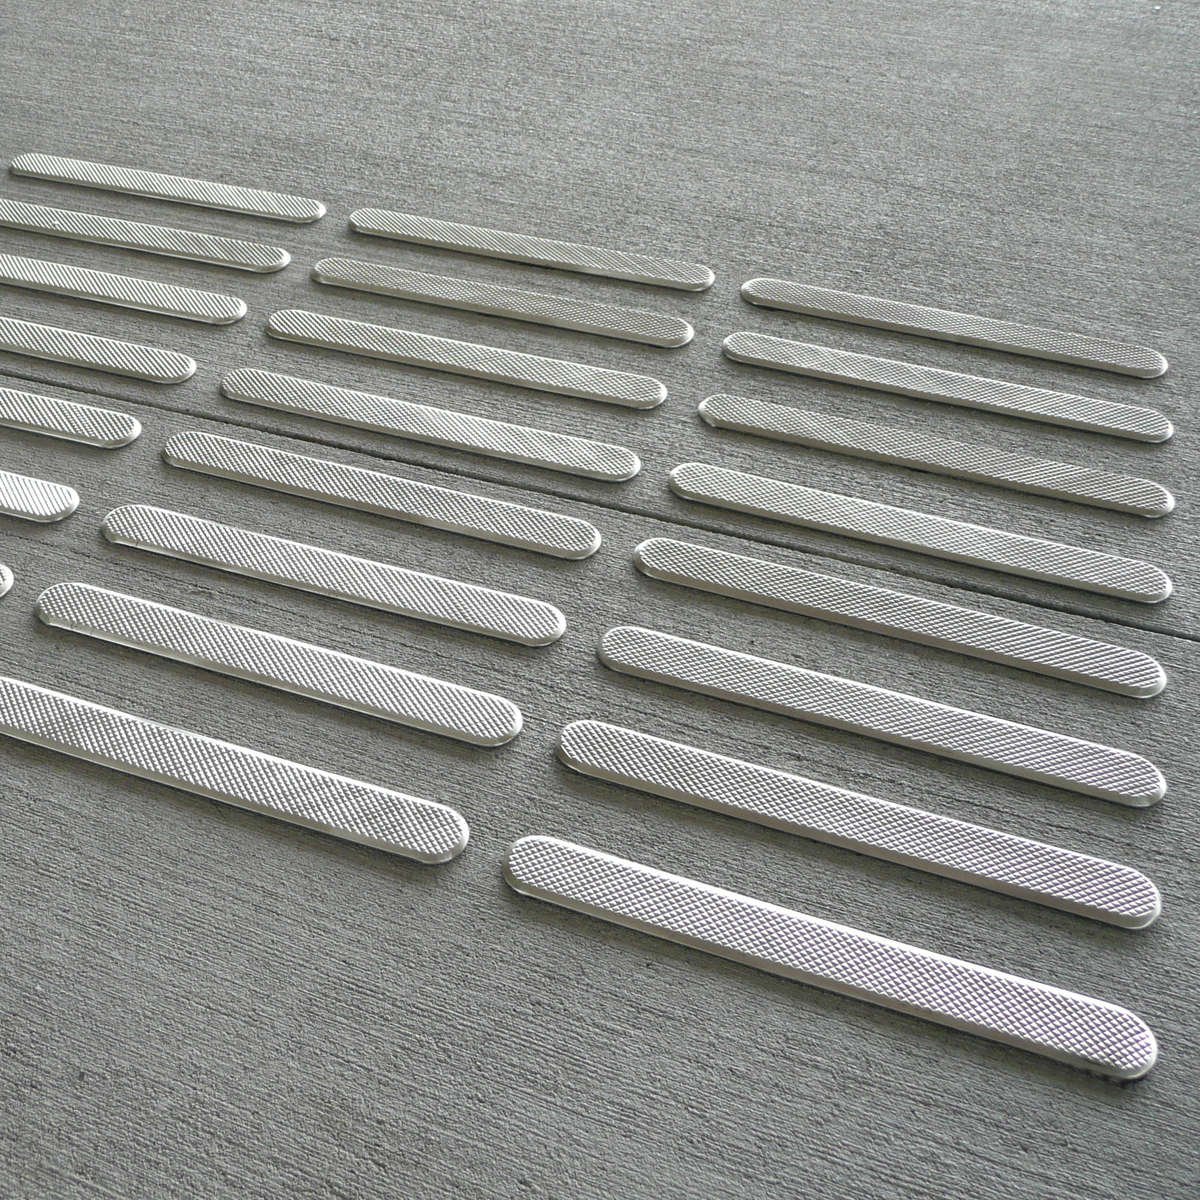 A close-up of TacPro stainless steel directional tactile indicator bars